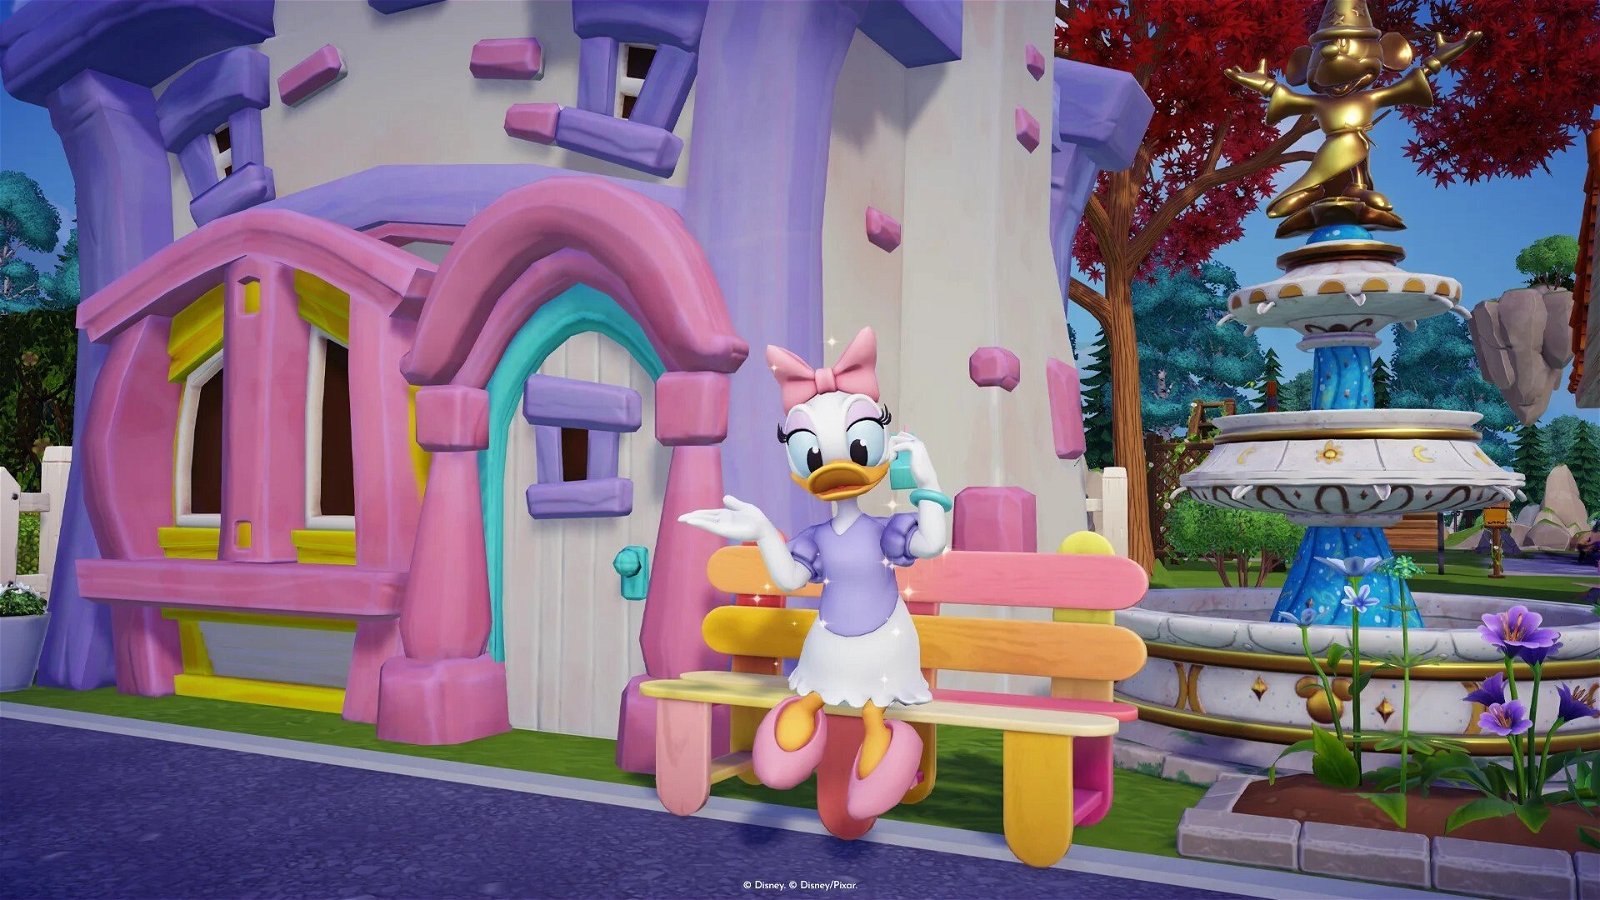 The Disney Dreamlight Valley Free Update Is Available Right Now